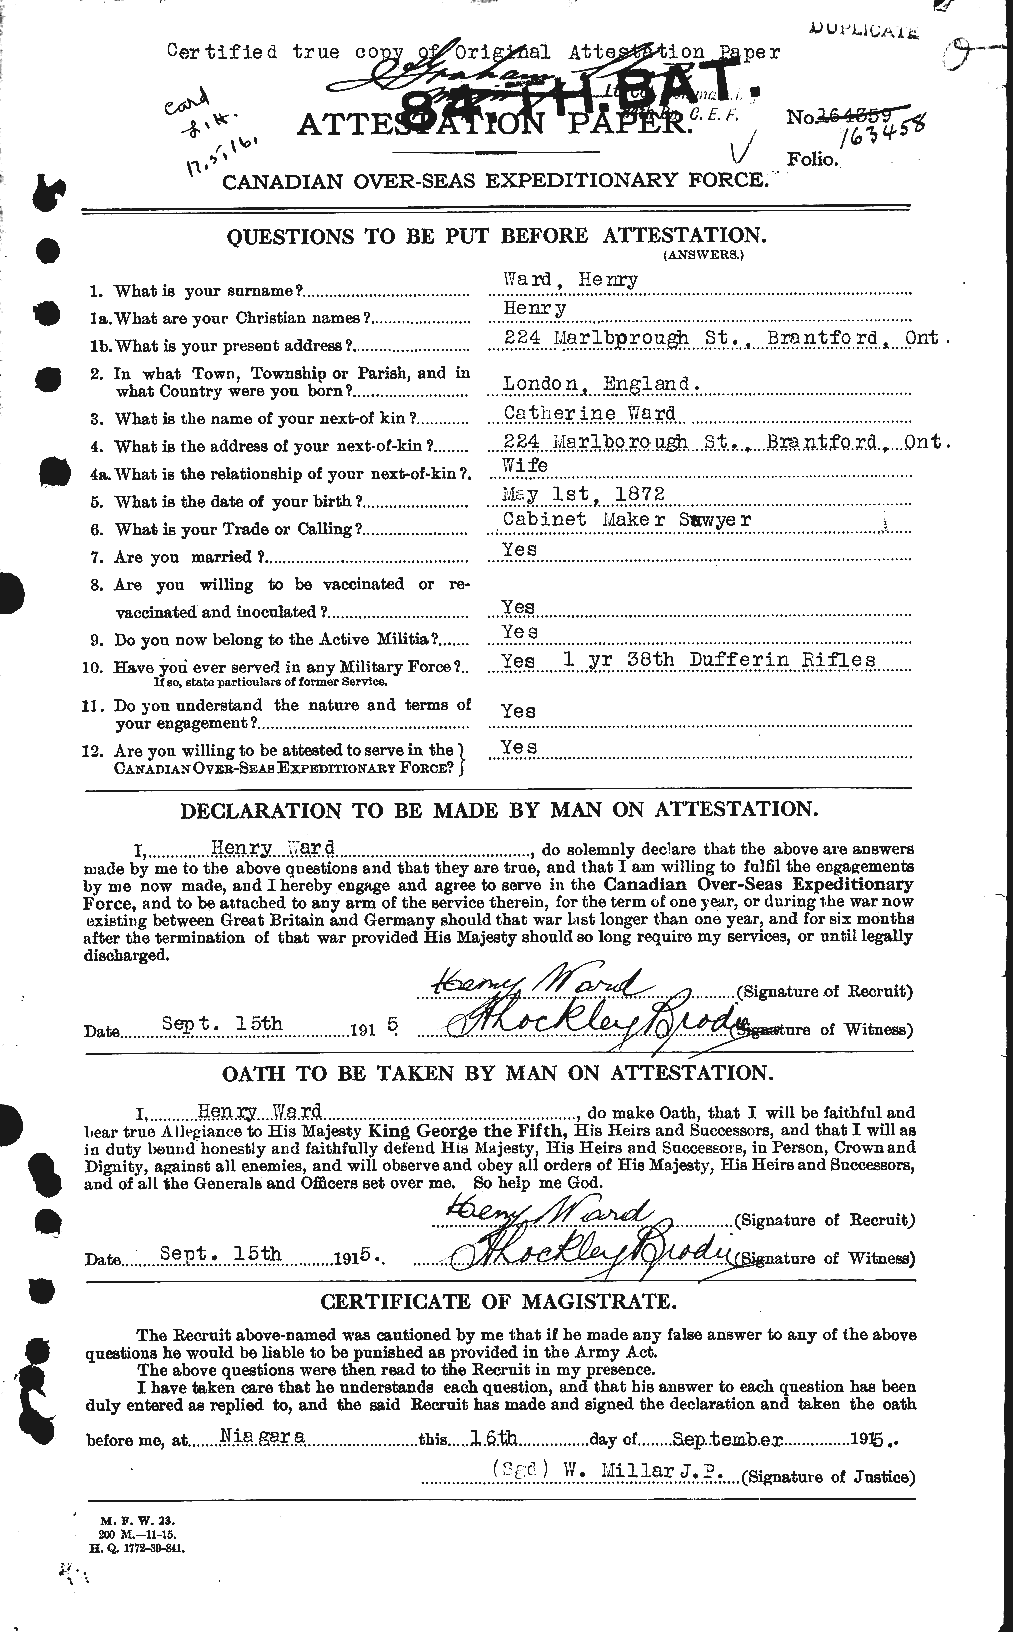 Personnel Records of the First World War - CEF 657819a